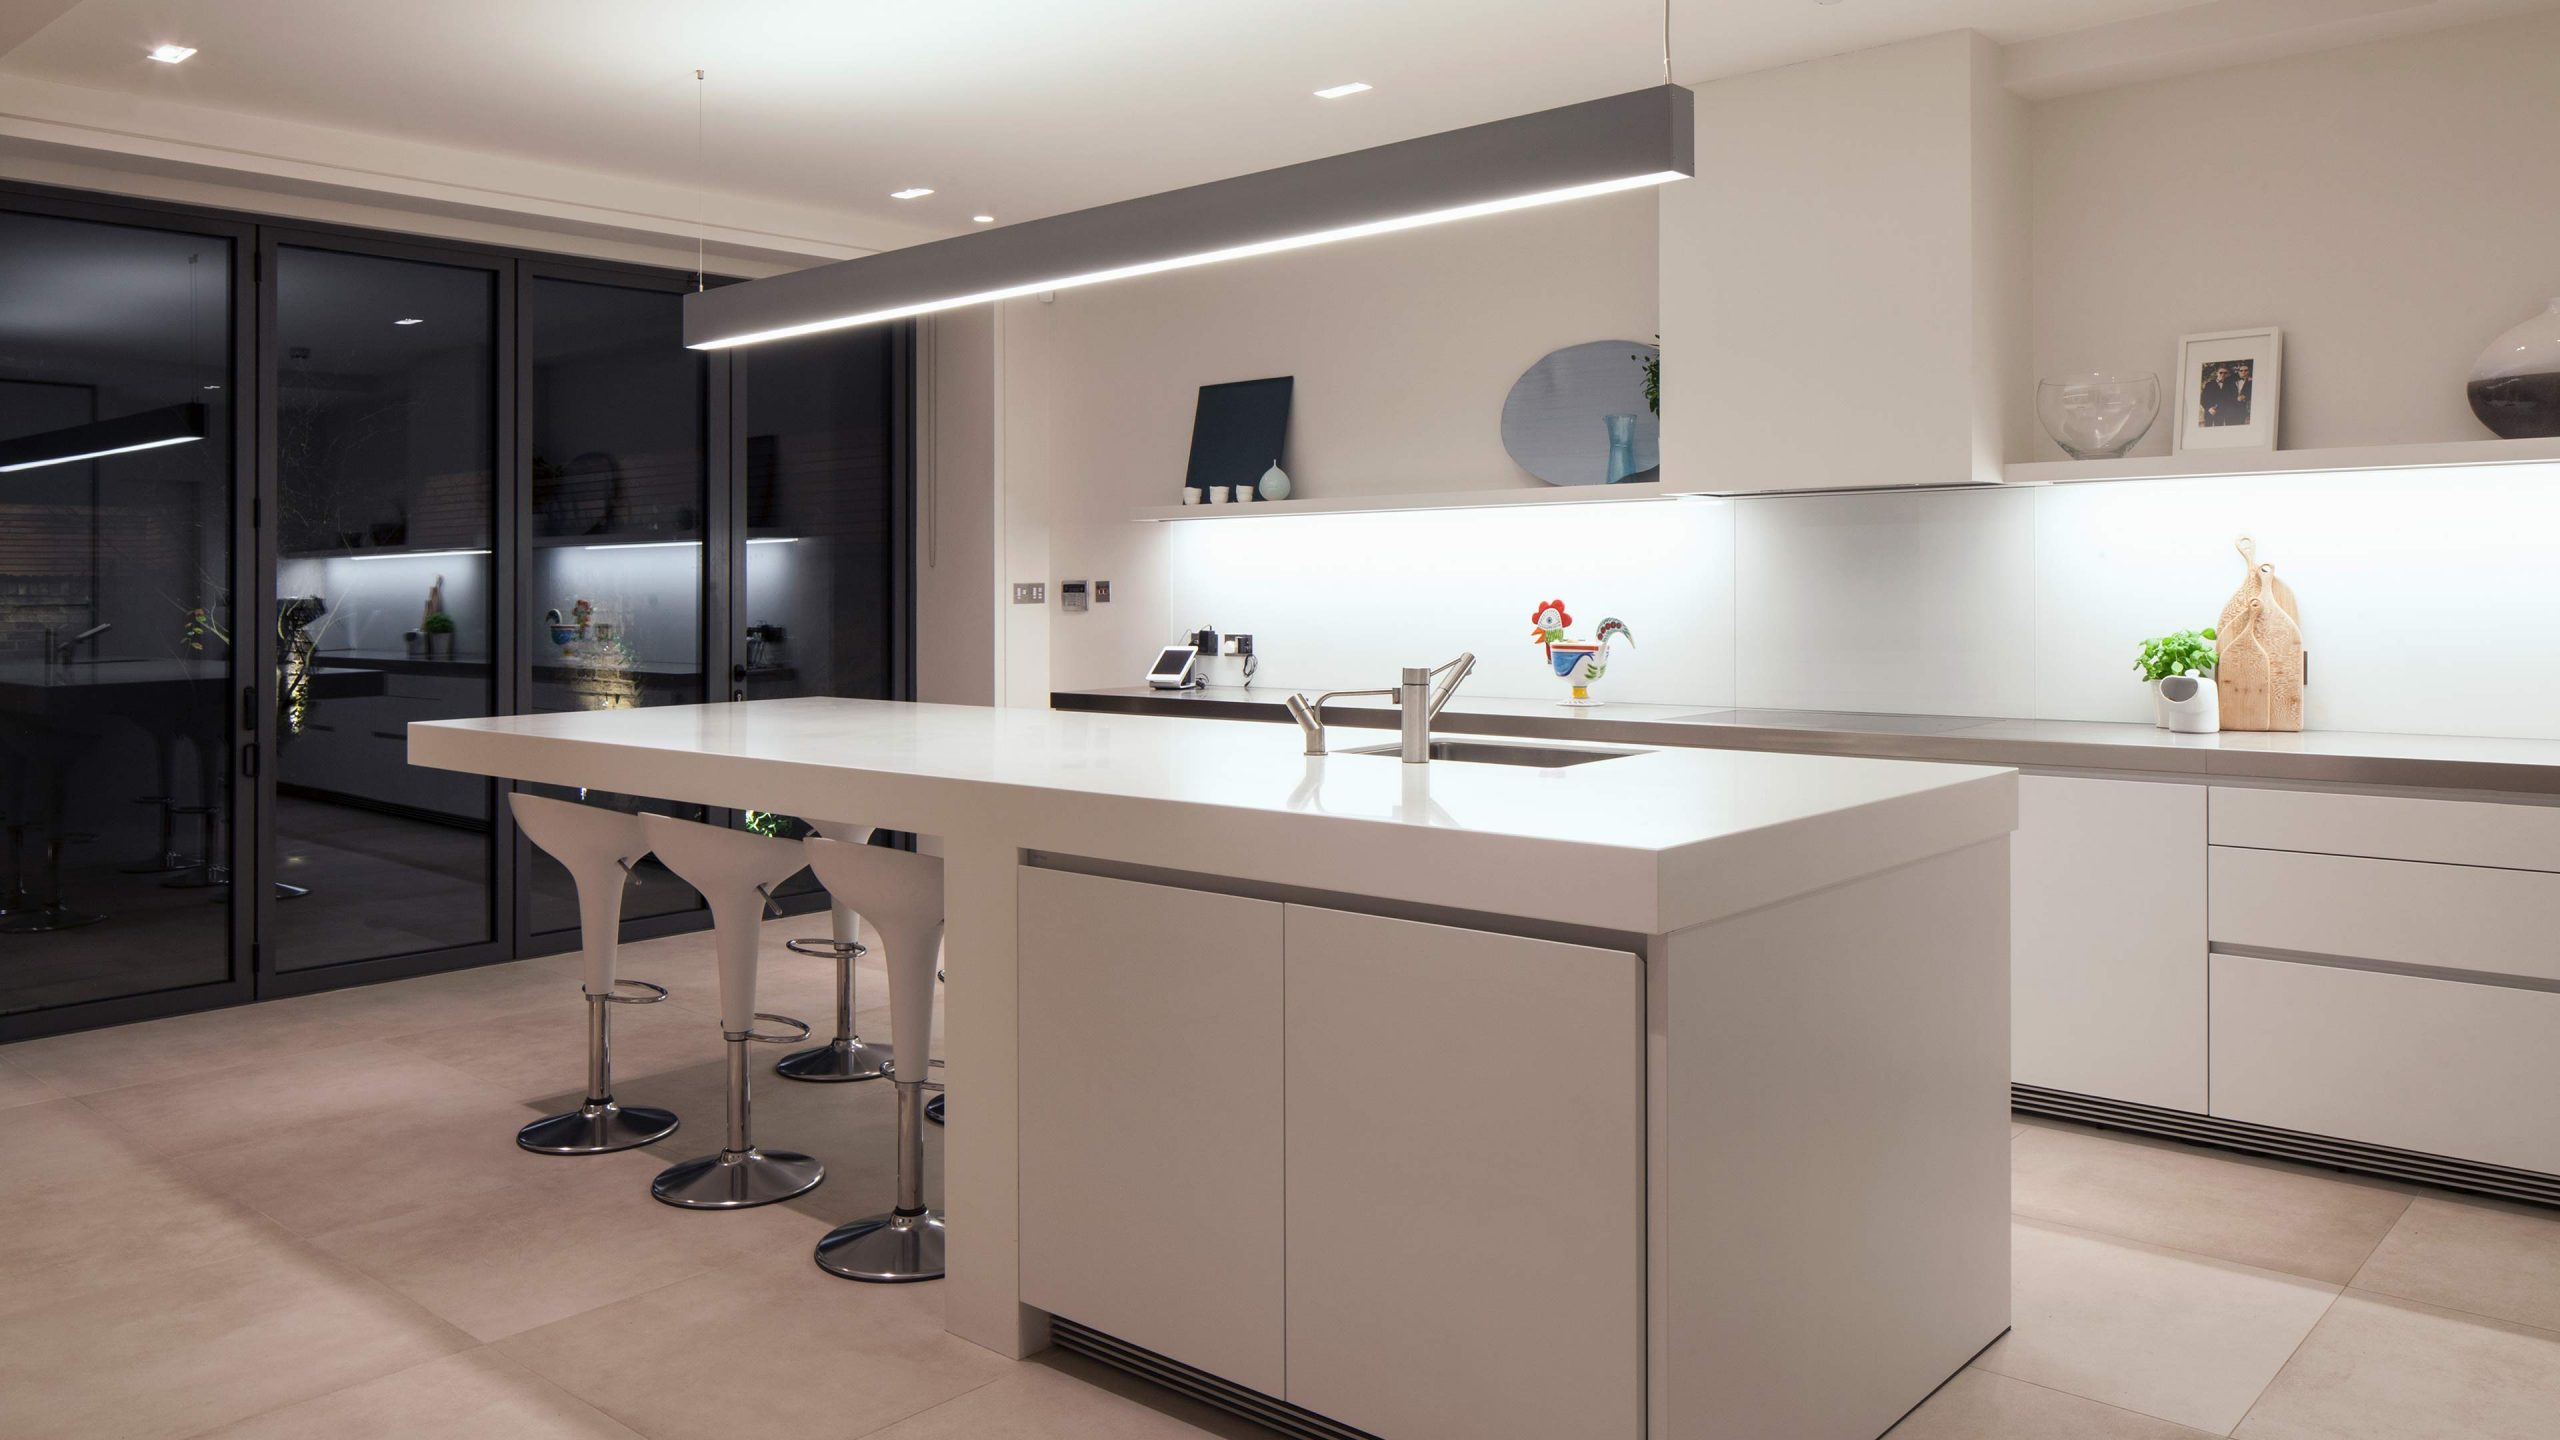 residential kitchen lighting can location